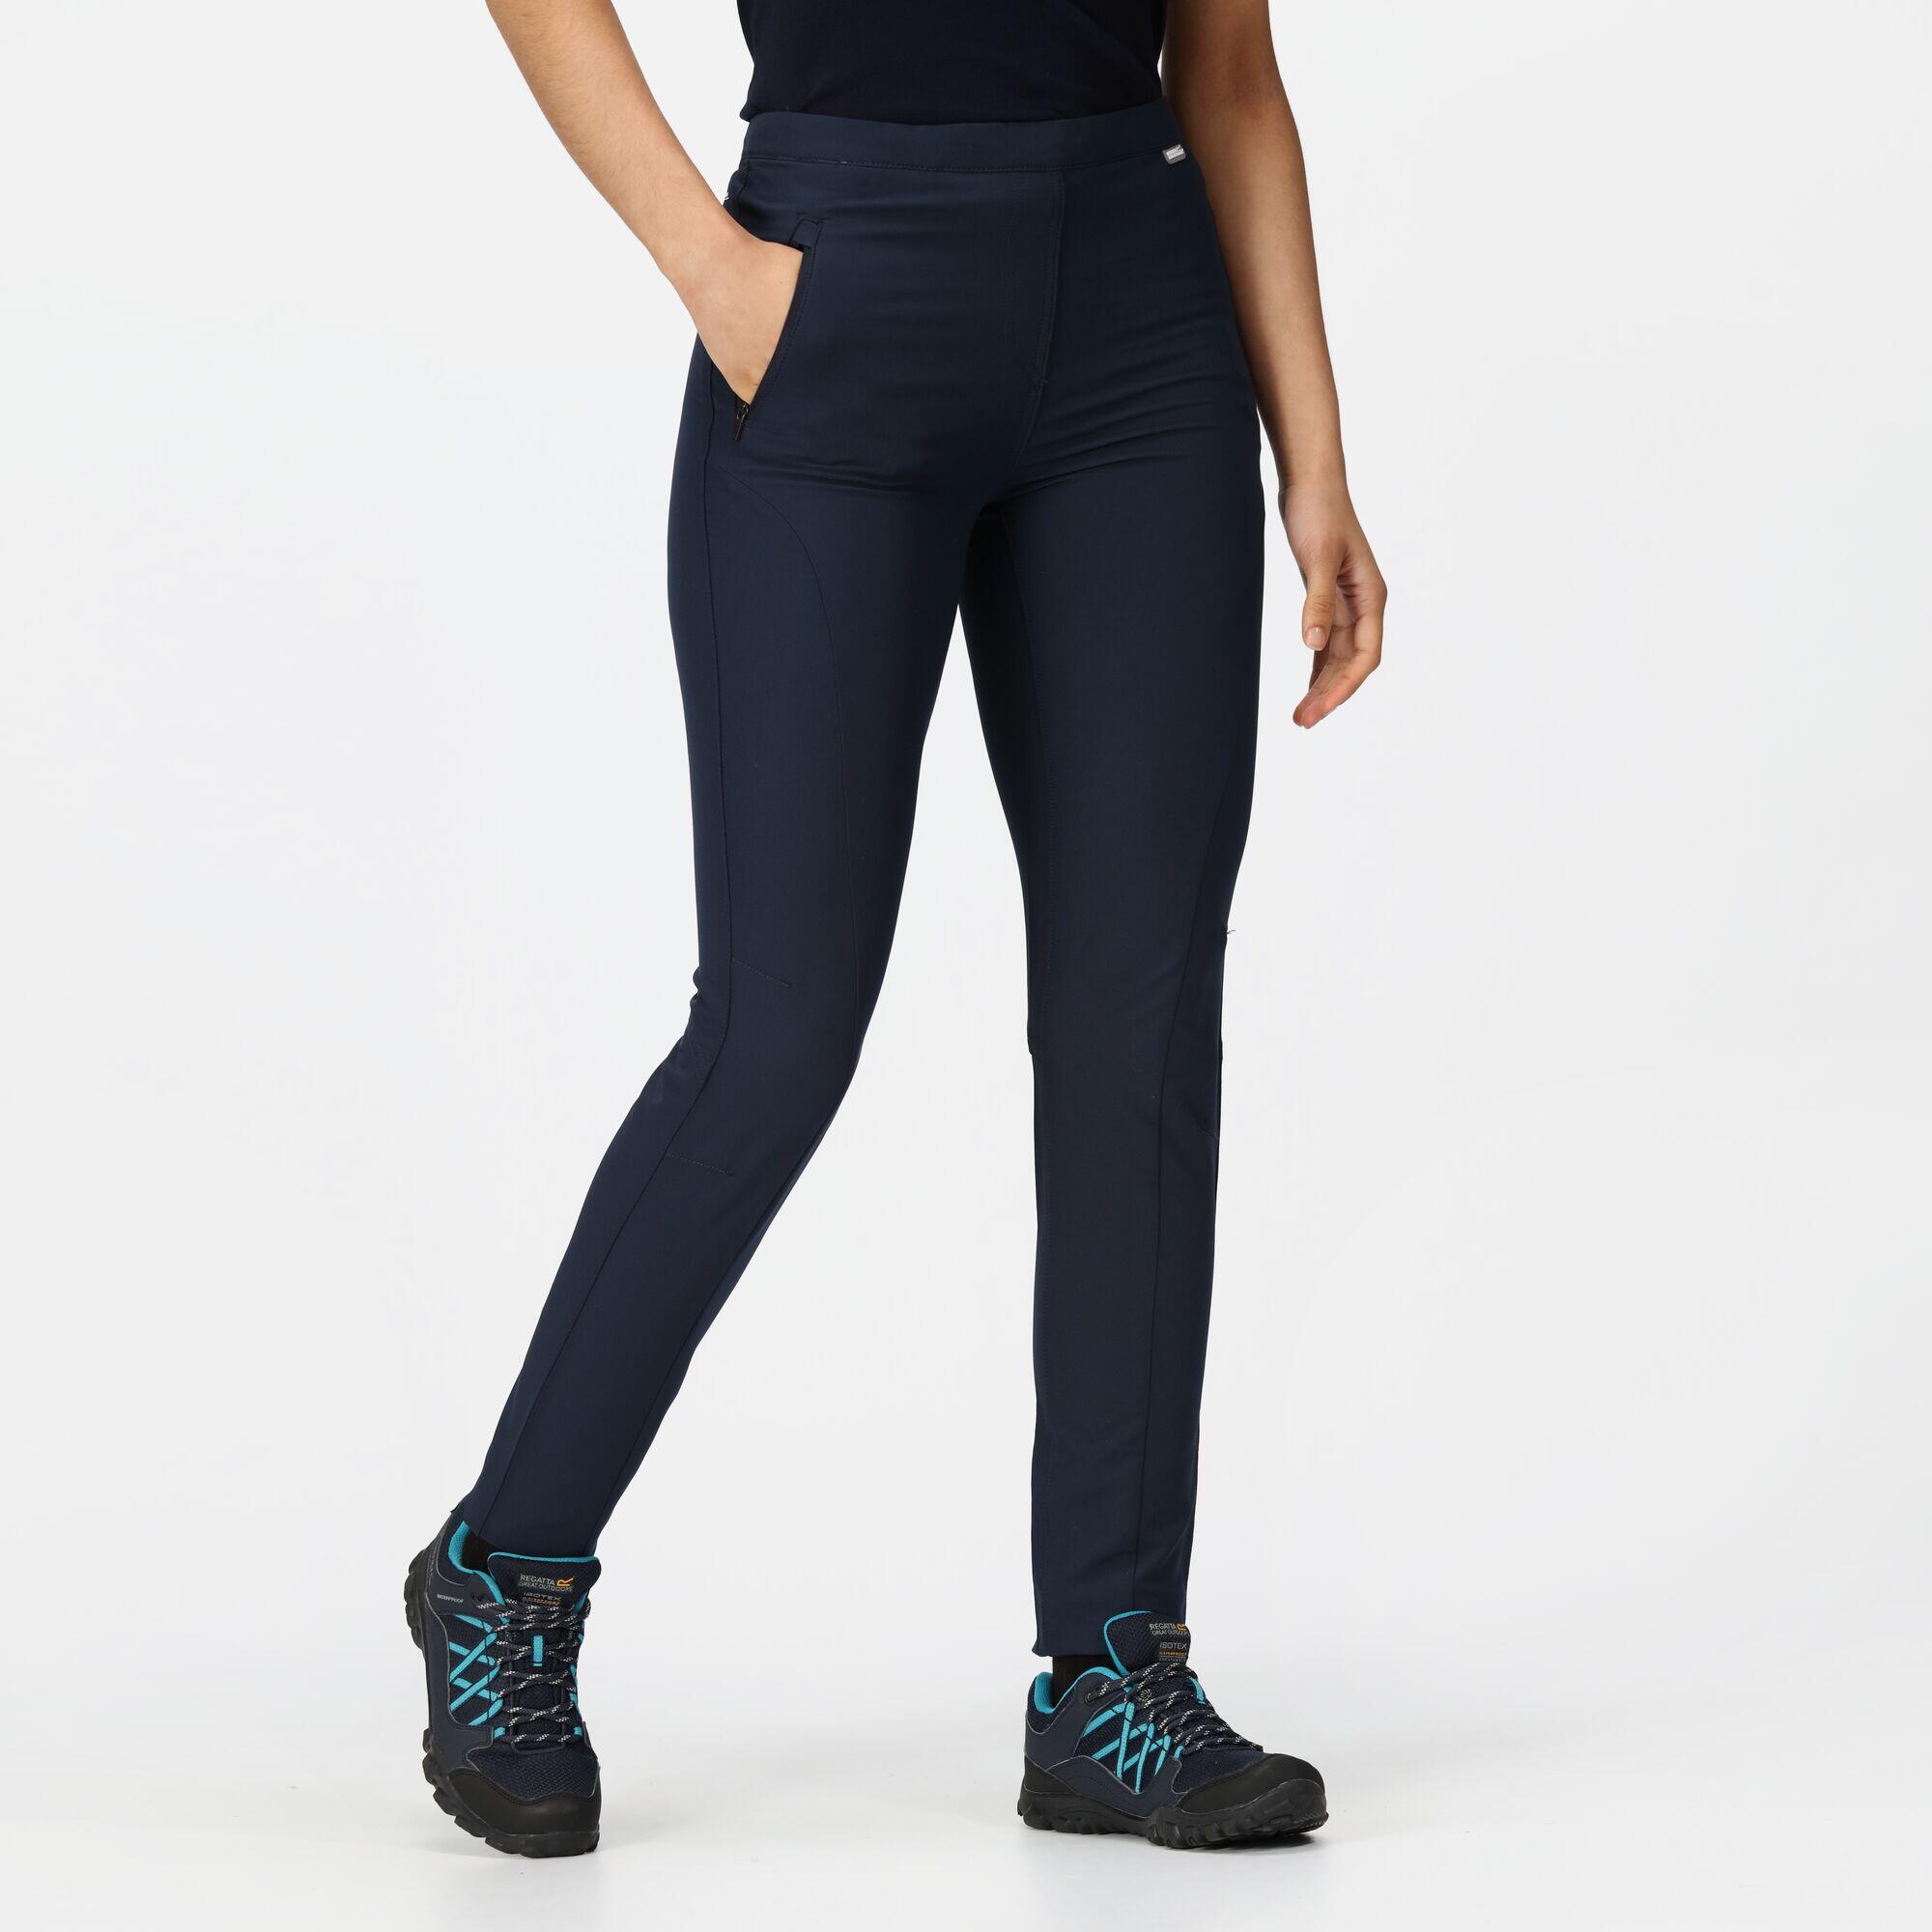 Pentre Stretch Women's Hiking Trousers - Navy 1/5